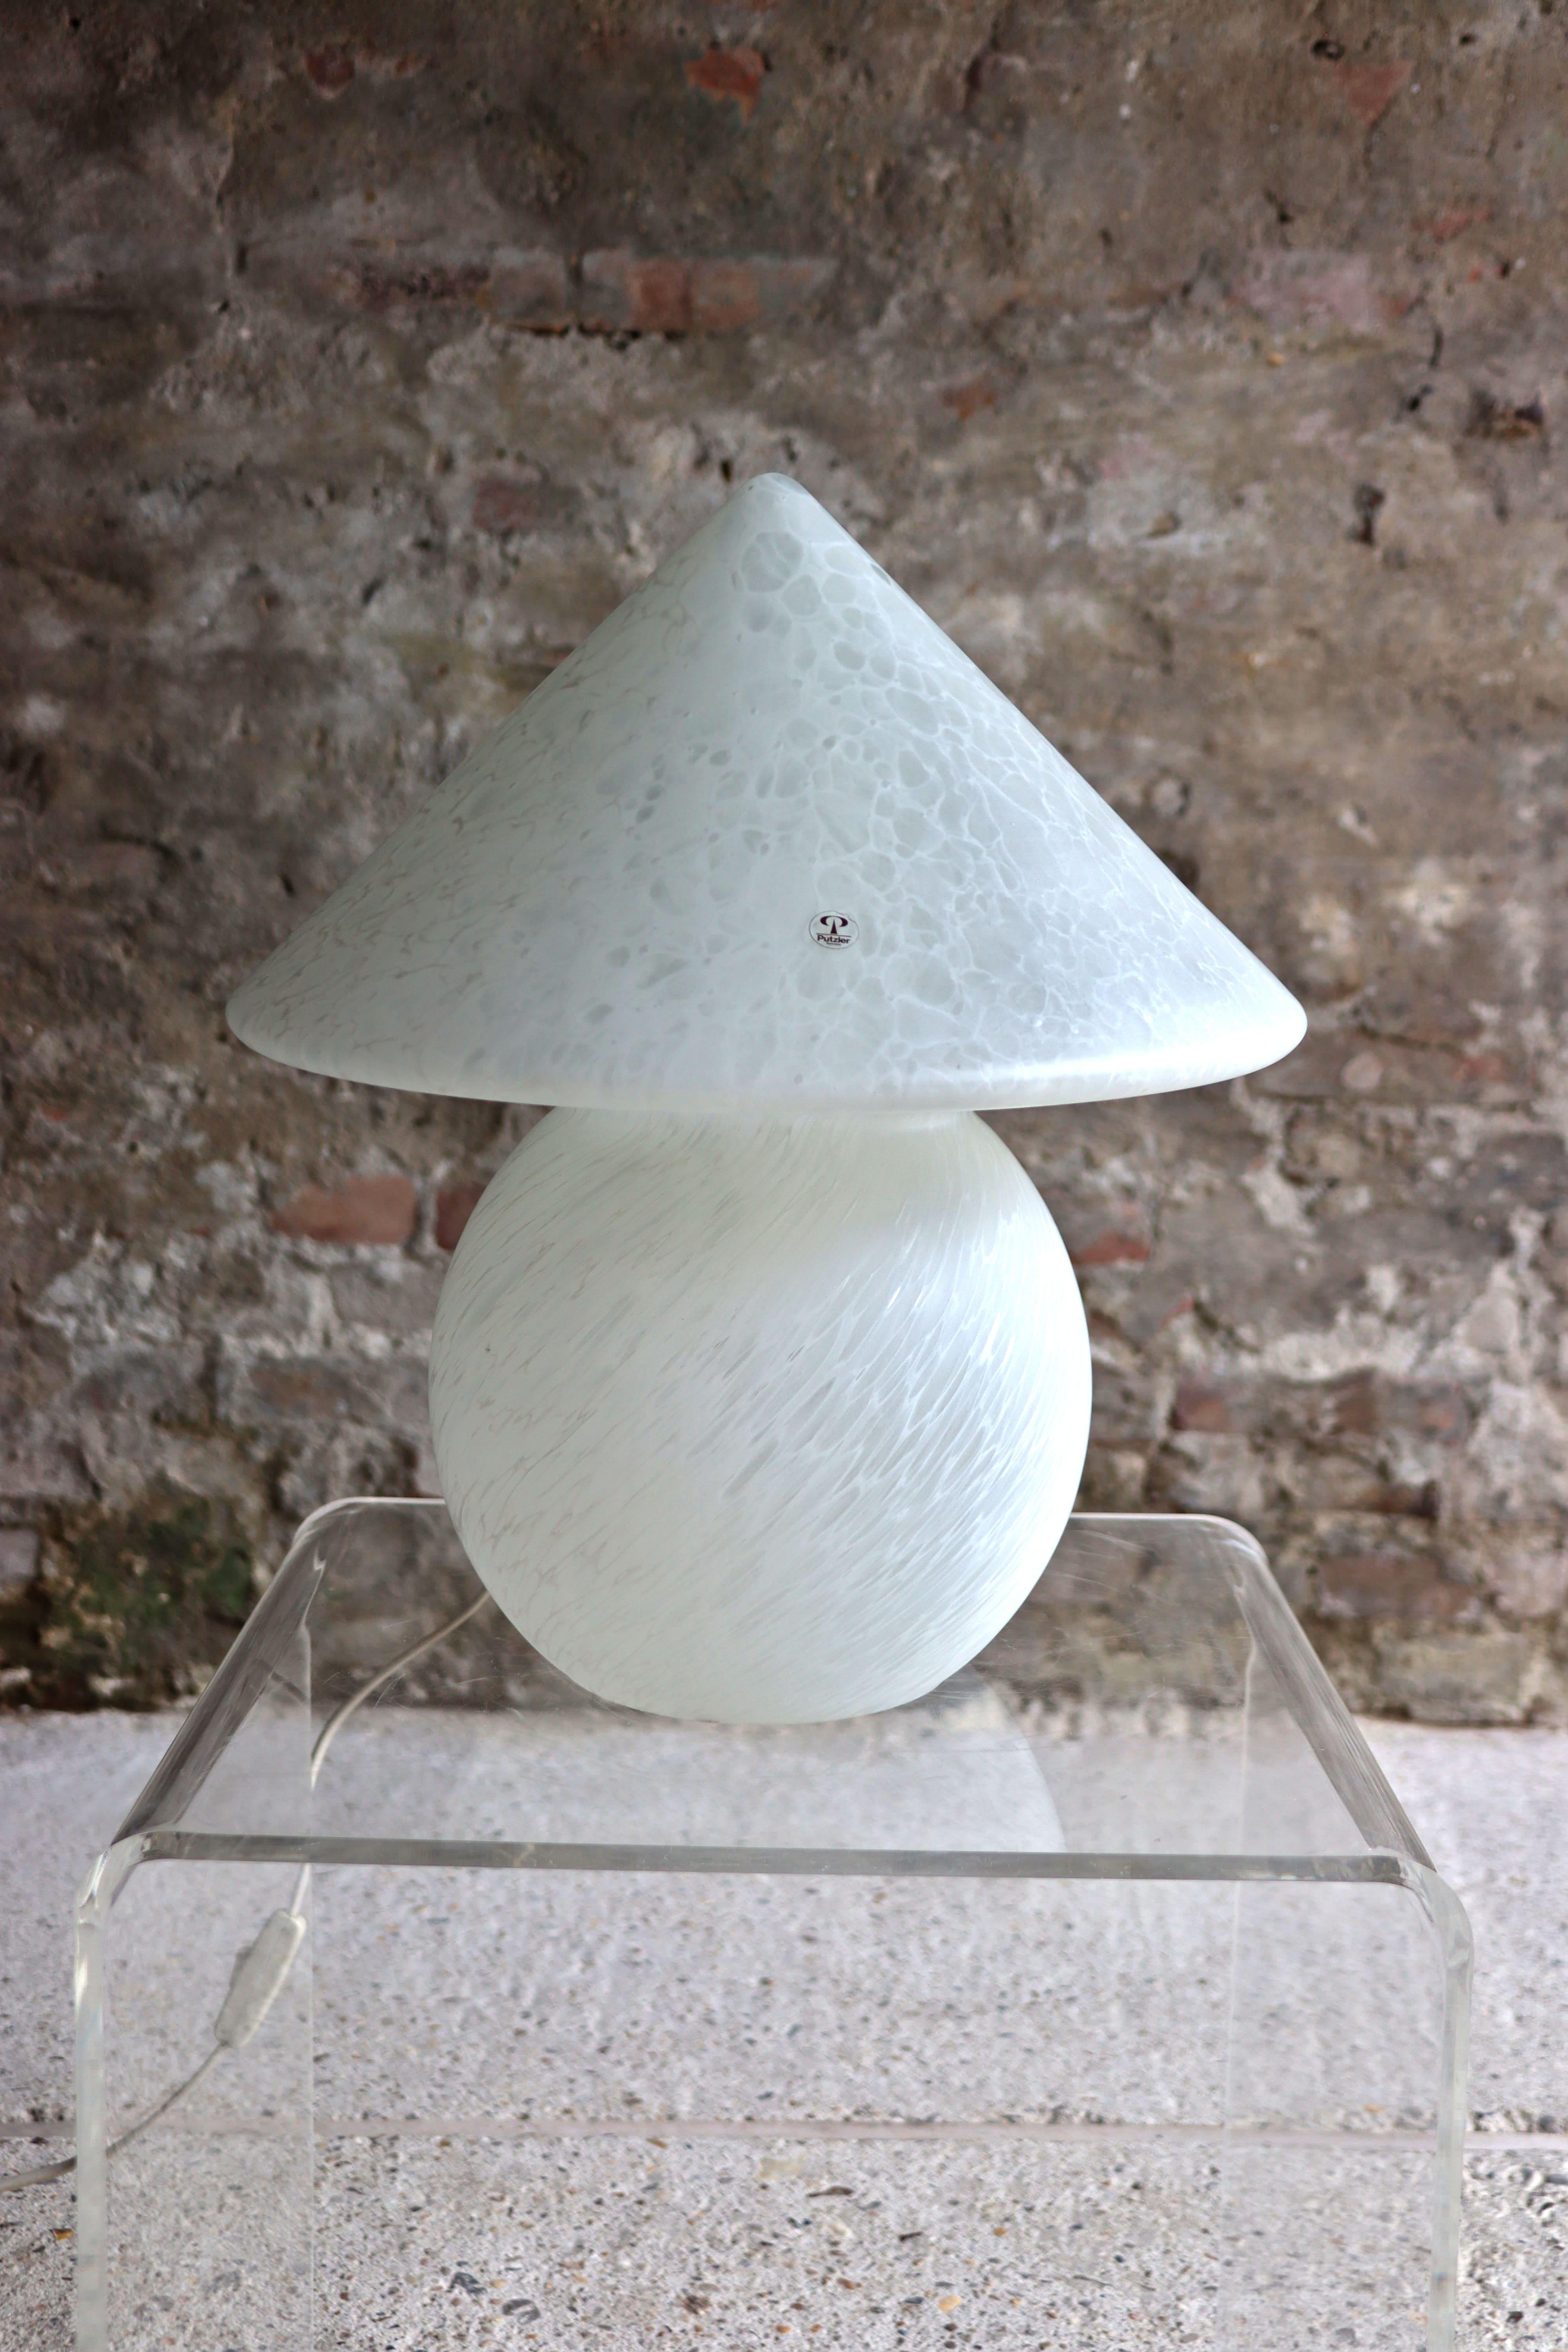 This cool mushroom table lamp is designed by Peill & Putzler in the 1970s. It has beautiful white opaline glass and is in really good condition. It has a small sport of damage on the inside layer of the glass. It’s almost invisible to see. Please